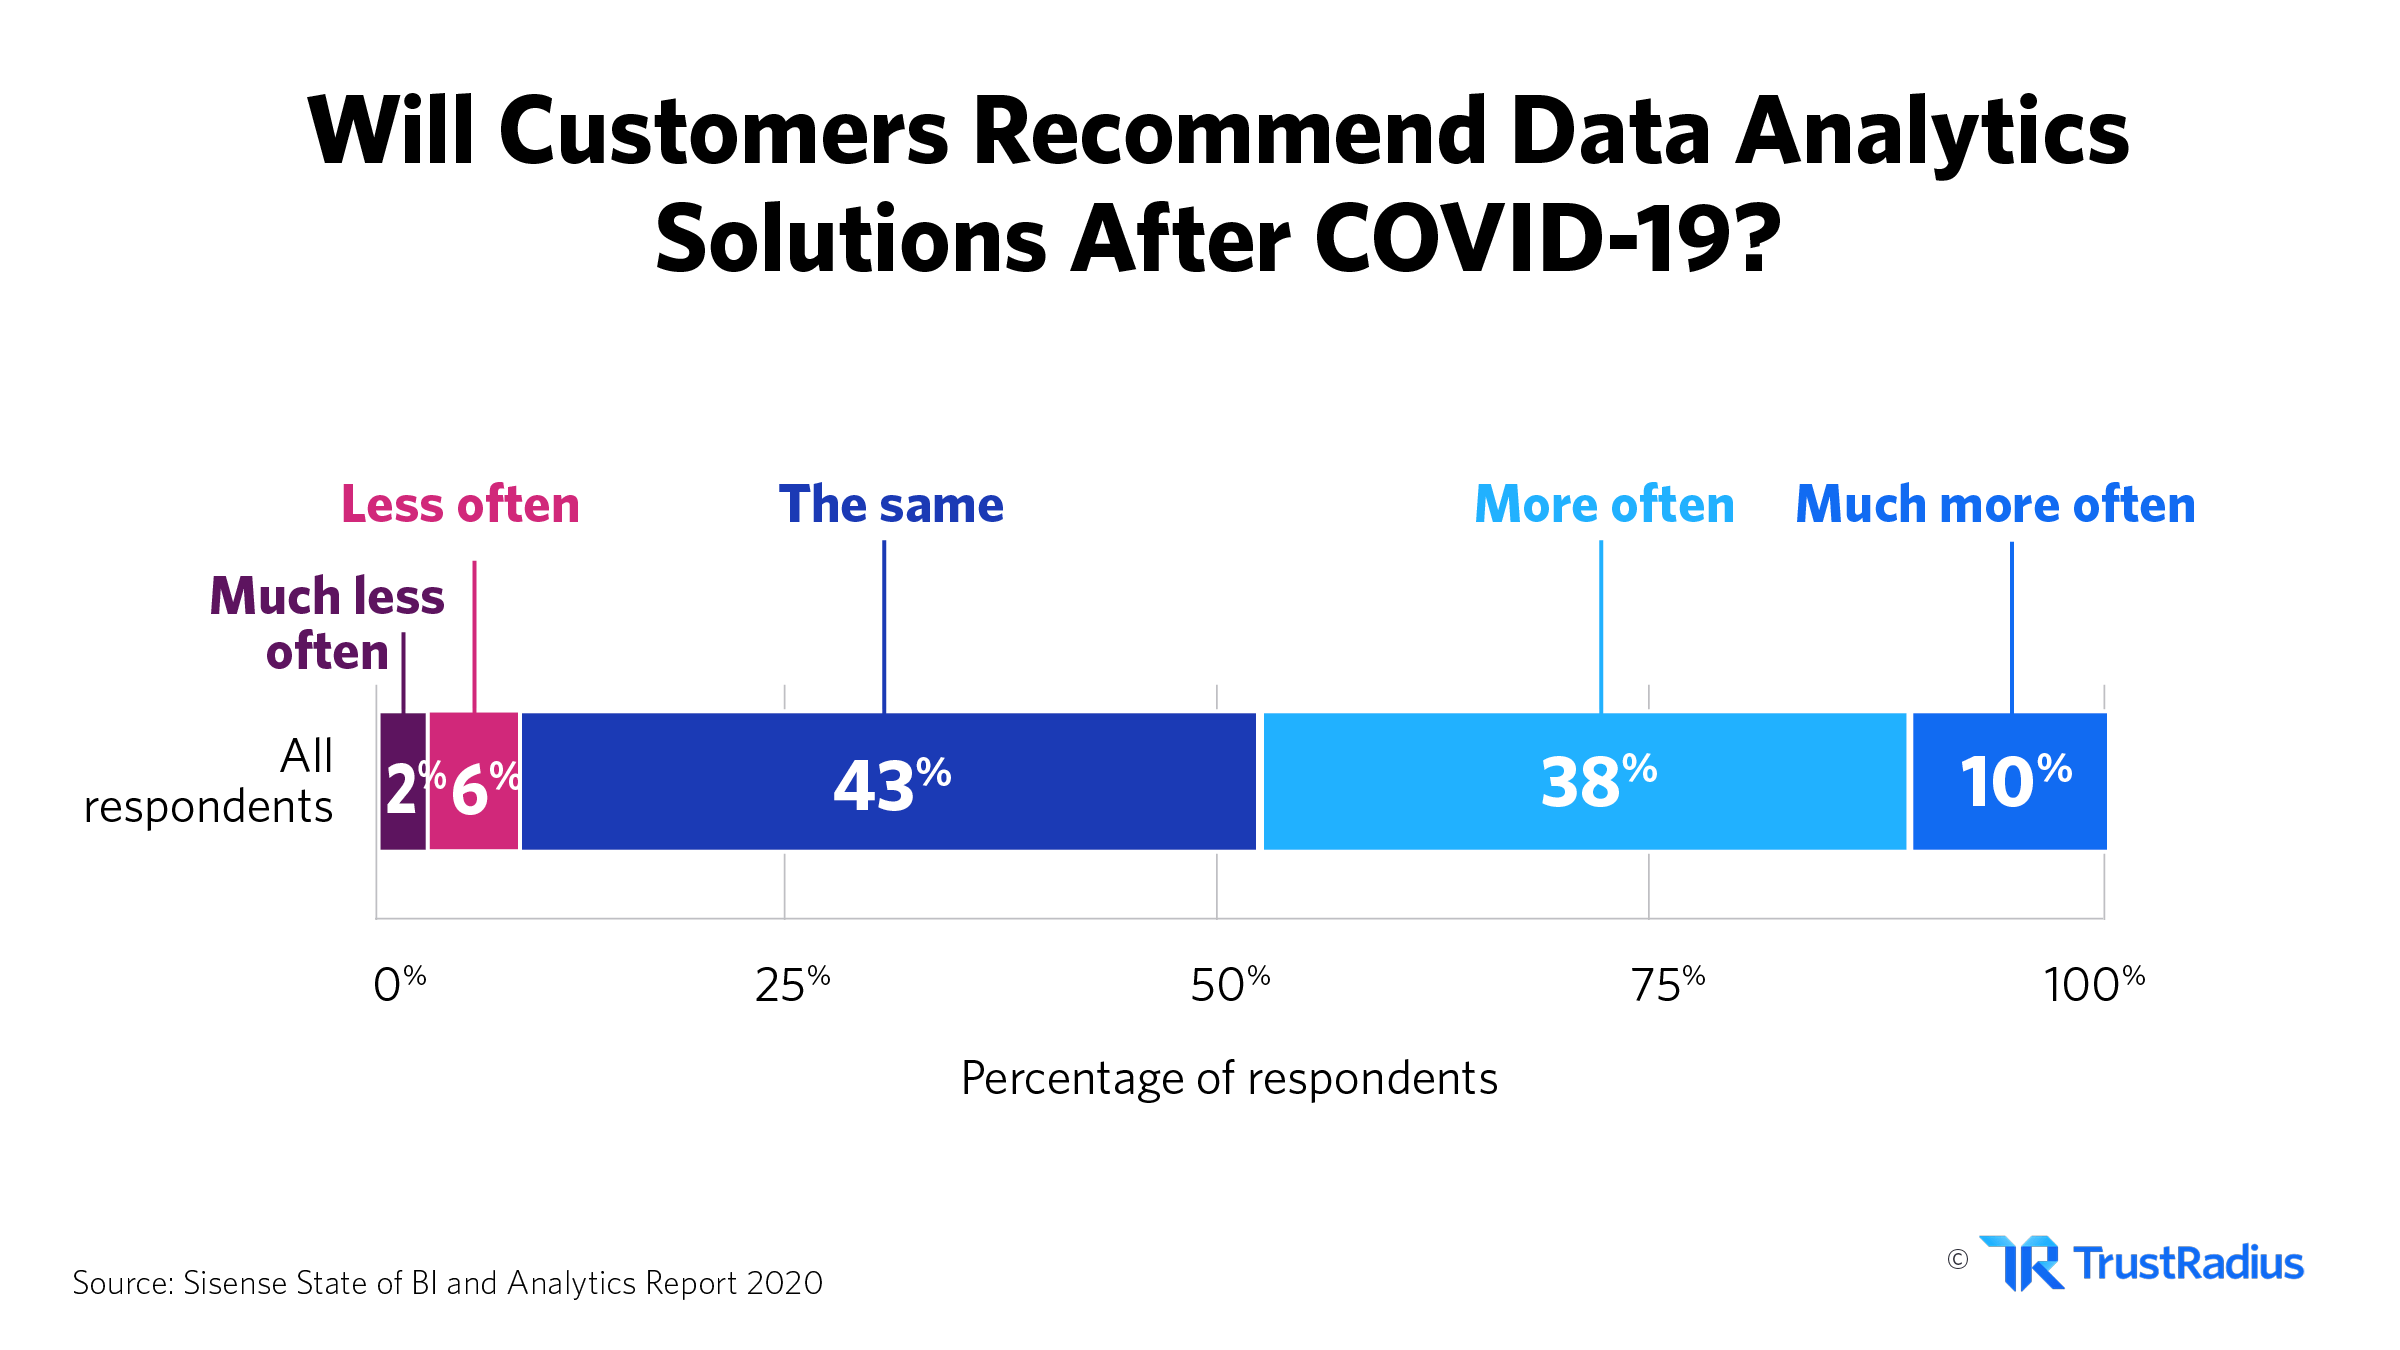 Will customers recommend data analytics solutions after Covid-19?